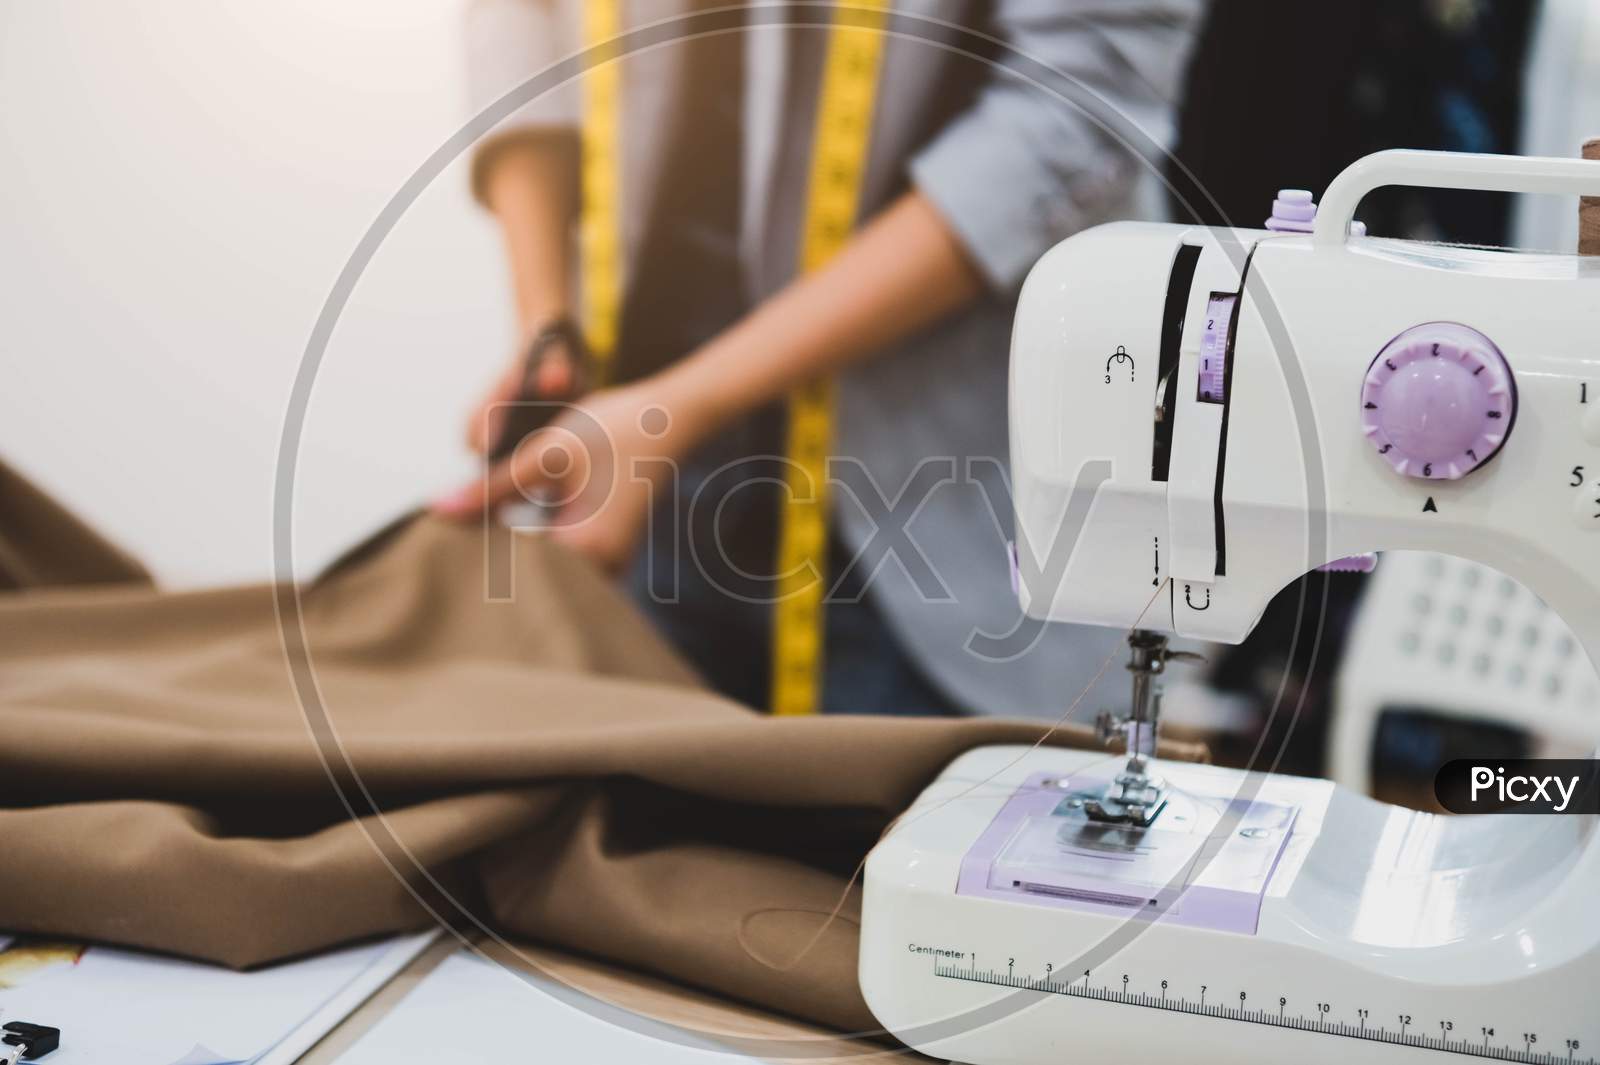 Dressmaker Cutting Dress Fabric On Sketch Line With Sewing Machine Foreground. Fashion Designer Tailor Or Sewer In Workshop Studio Designing New Collection Clothes. Business Owner And Entrepreneur